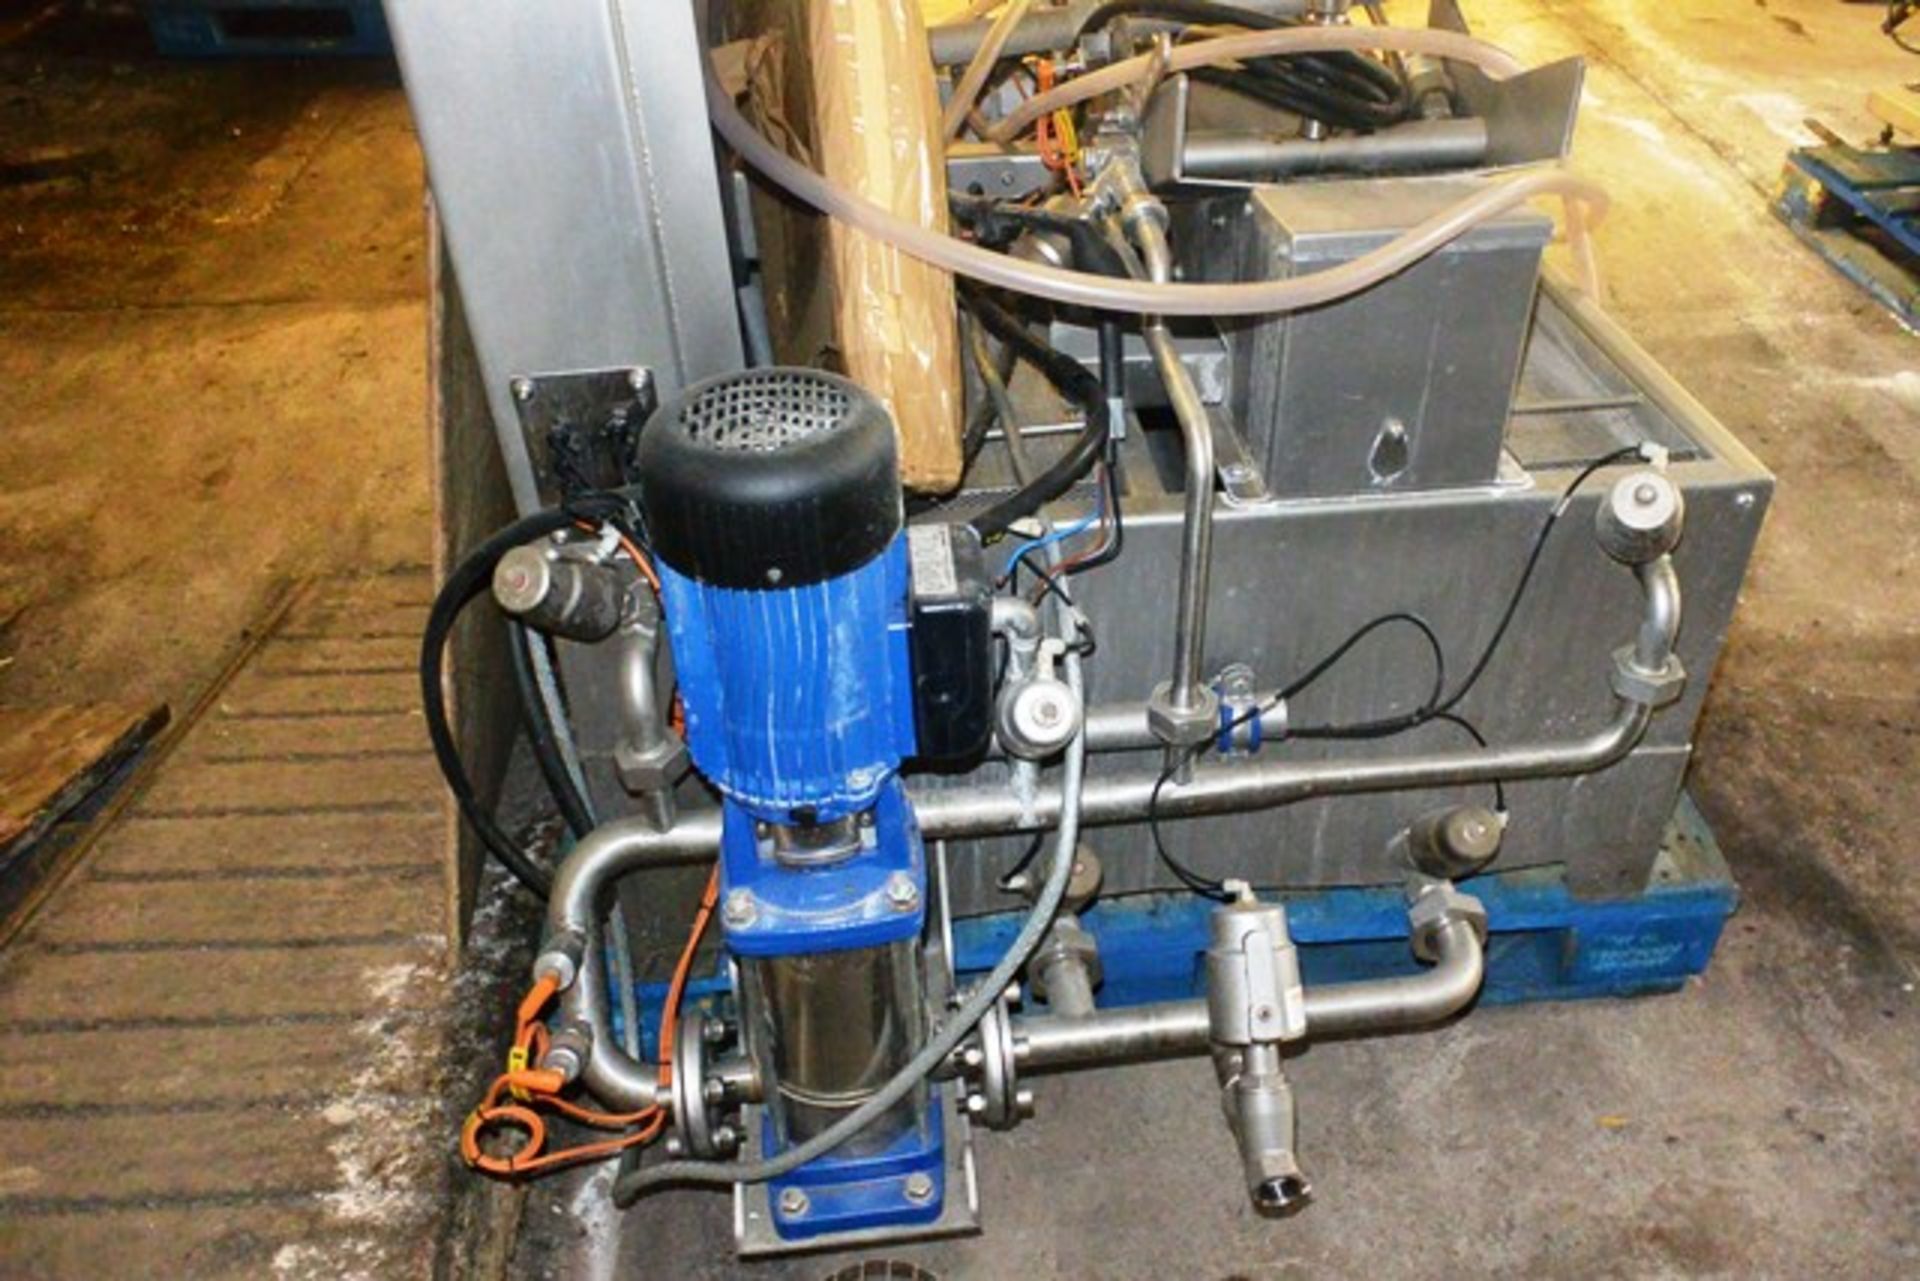 Microdat twin keg cask washer (3 phase), with associated pipework and power cable (as per lot - Image 4 of 6